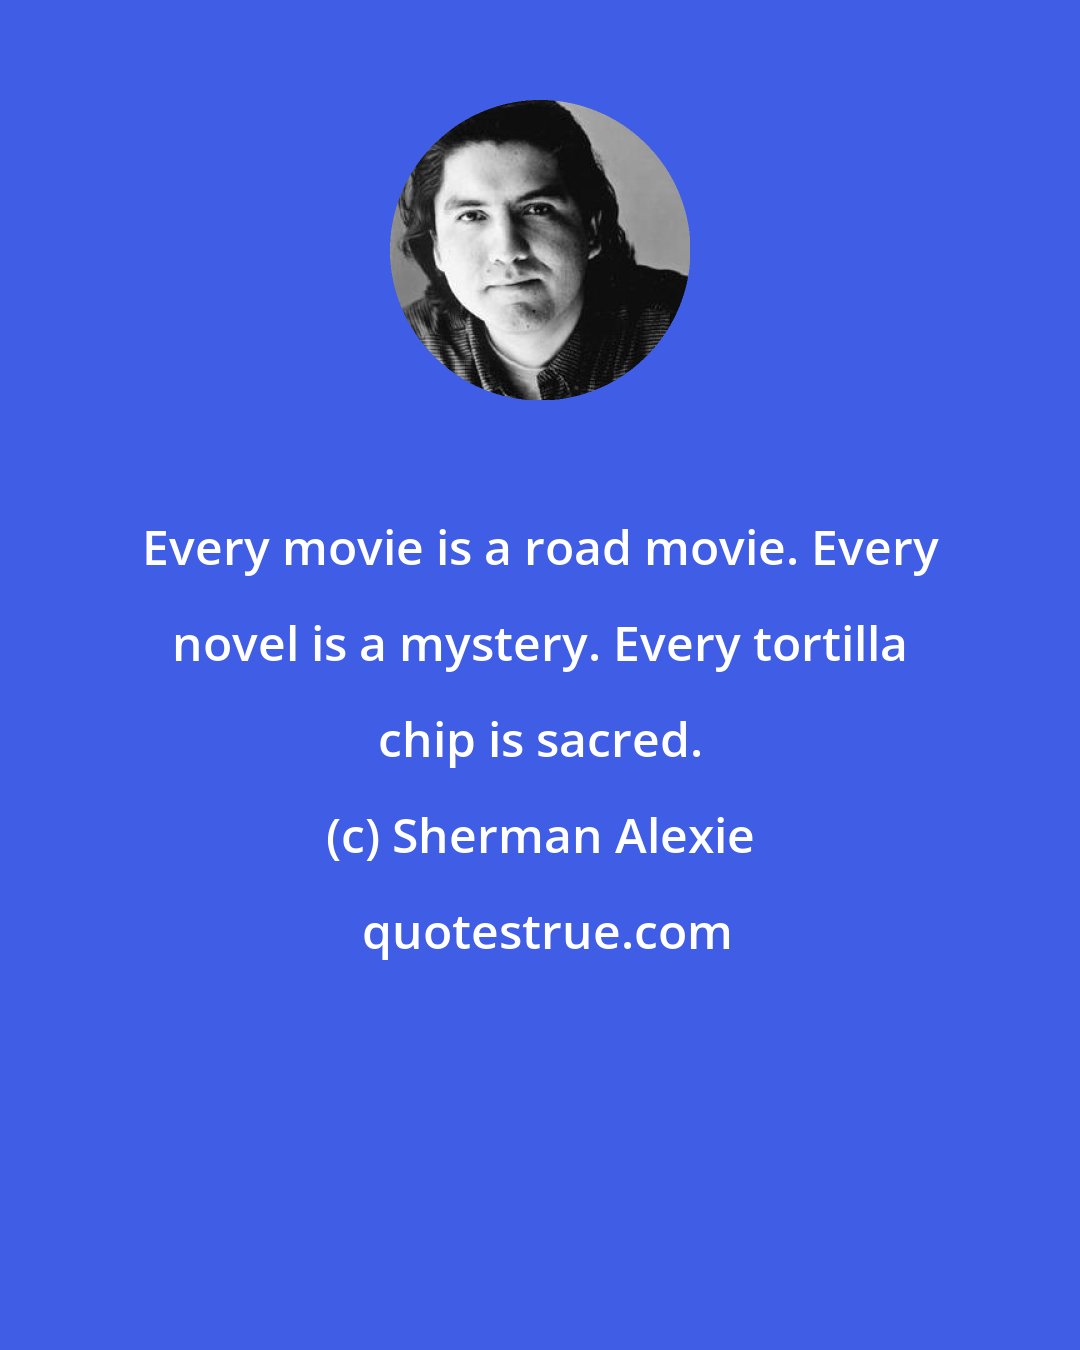 Sherman Alexie: Every movie is a road movie. Every novel is a mystery. Every tortilla chip is sacred.